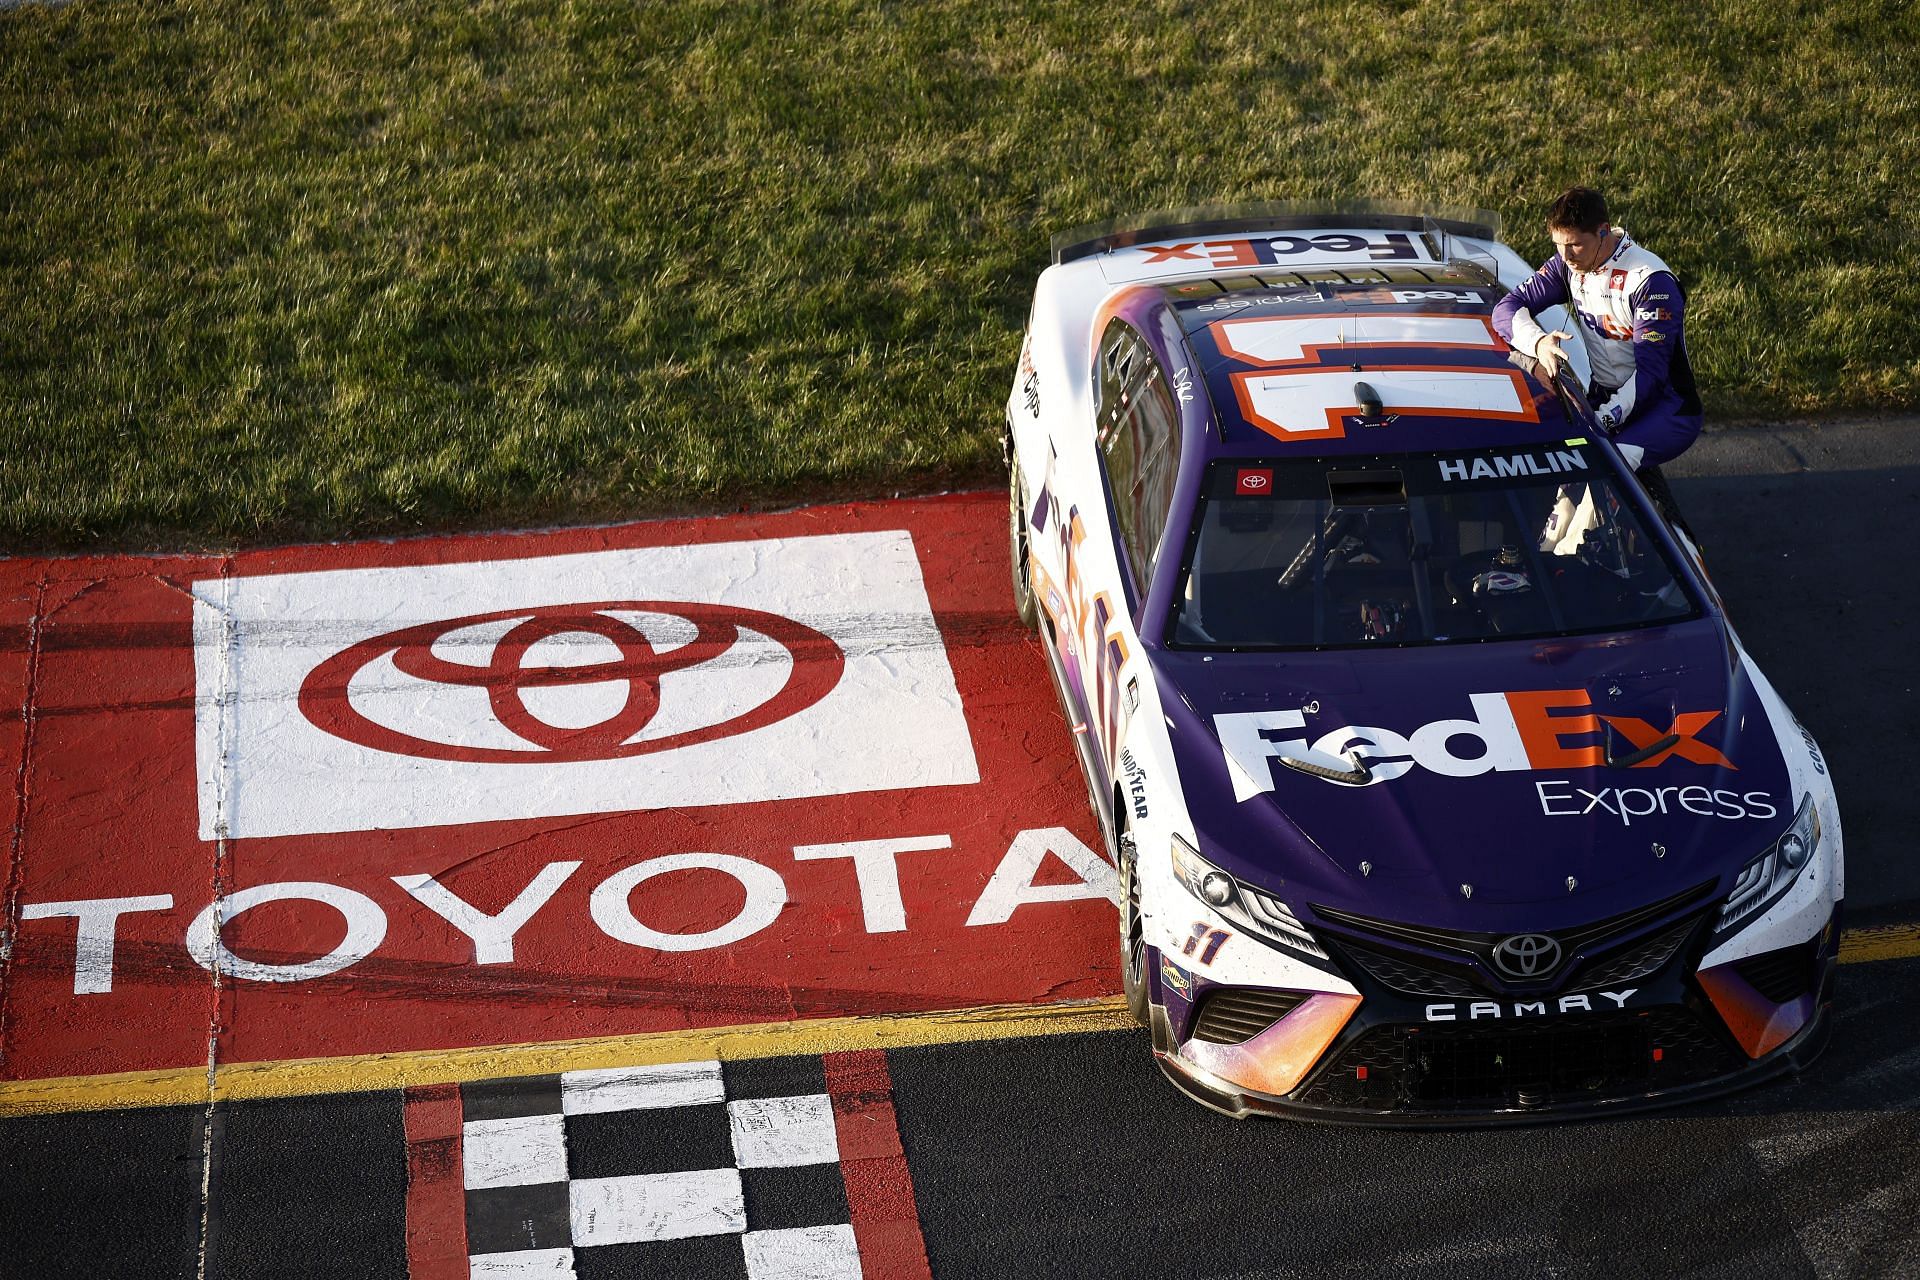 Denny Hamlin celebrates after winning the NASCAR Cup Series Toyota Owners 400 at Richmond Raceway.